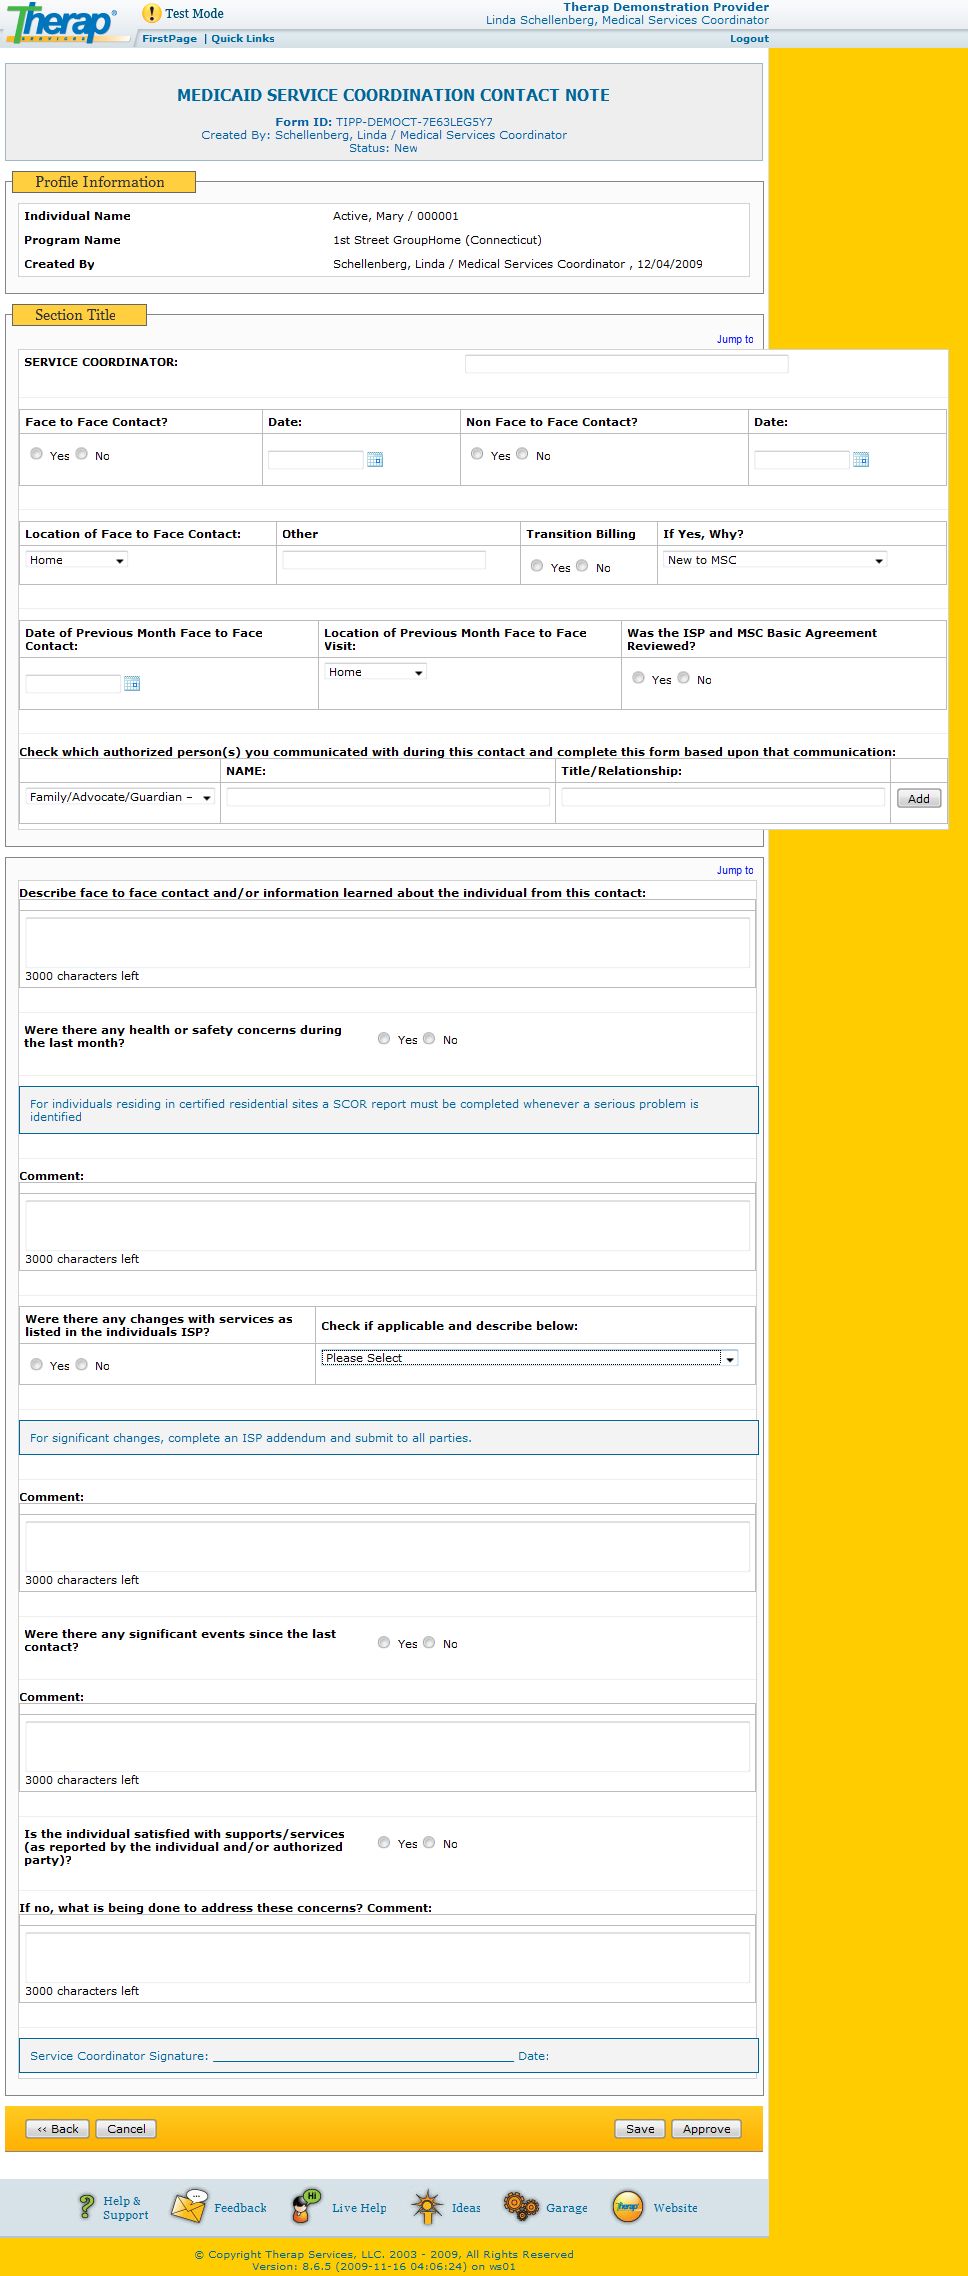 Screenshot of Medicaid Service Coordination Contact Note